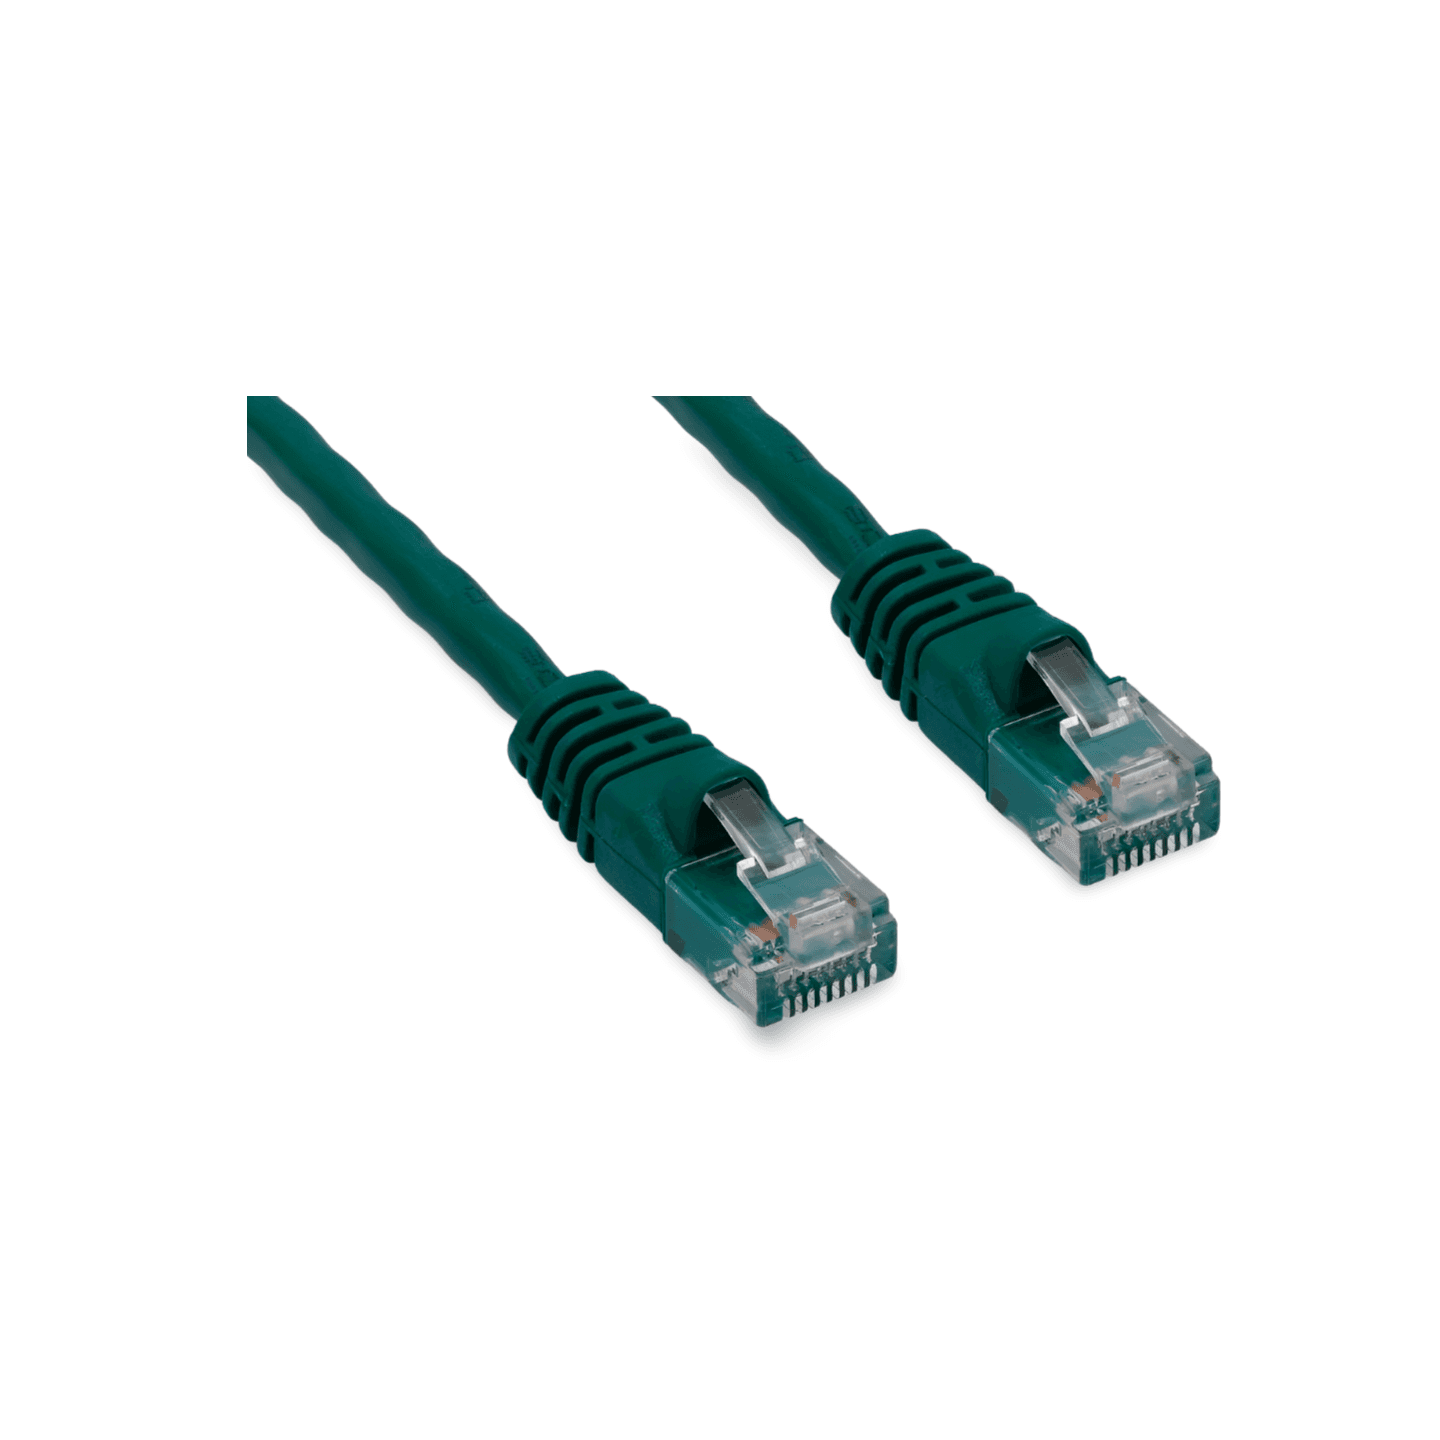 3ft Cat5e Ethernet Network Cable RJ45 green